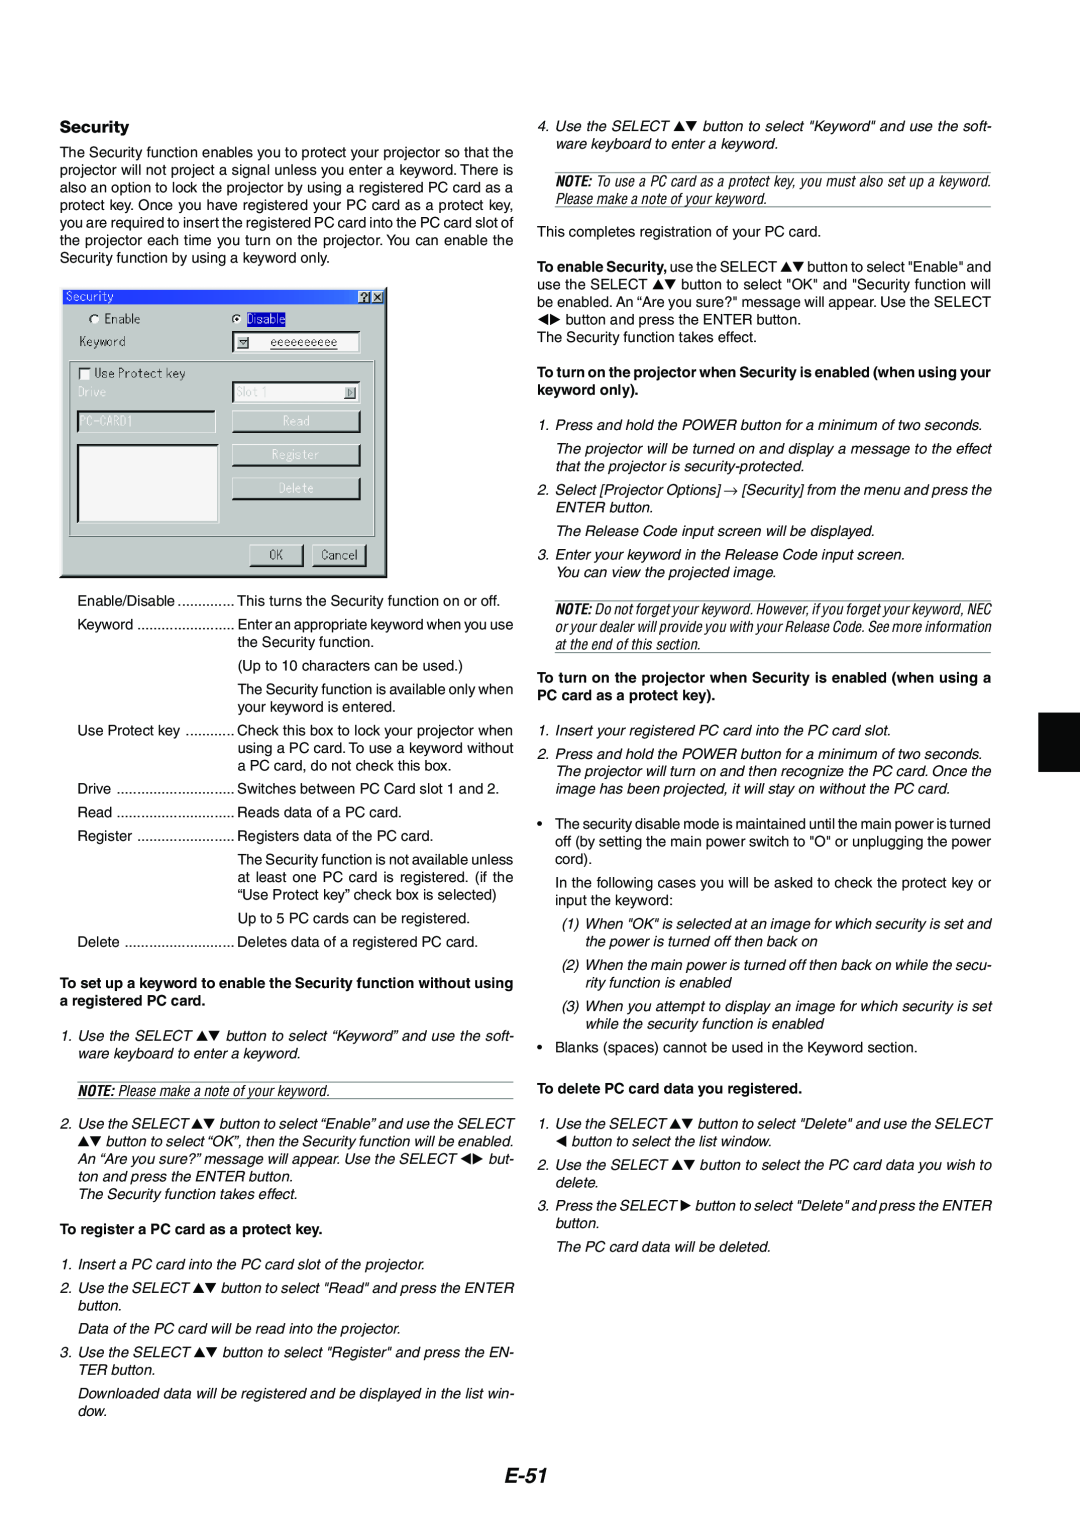 NEC MT1065/MT1060 user manual E-51, To register a PC card as a protect key, To enable Security, use the SELECT 